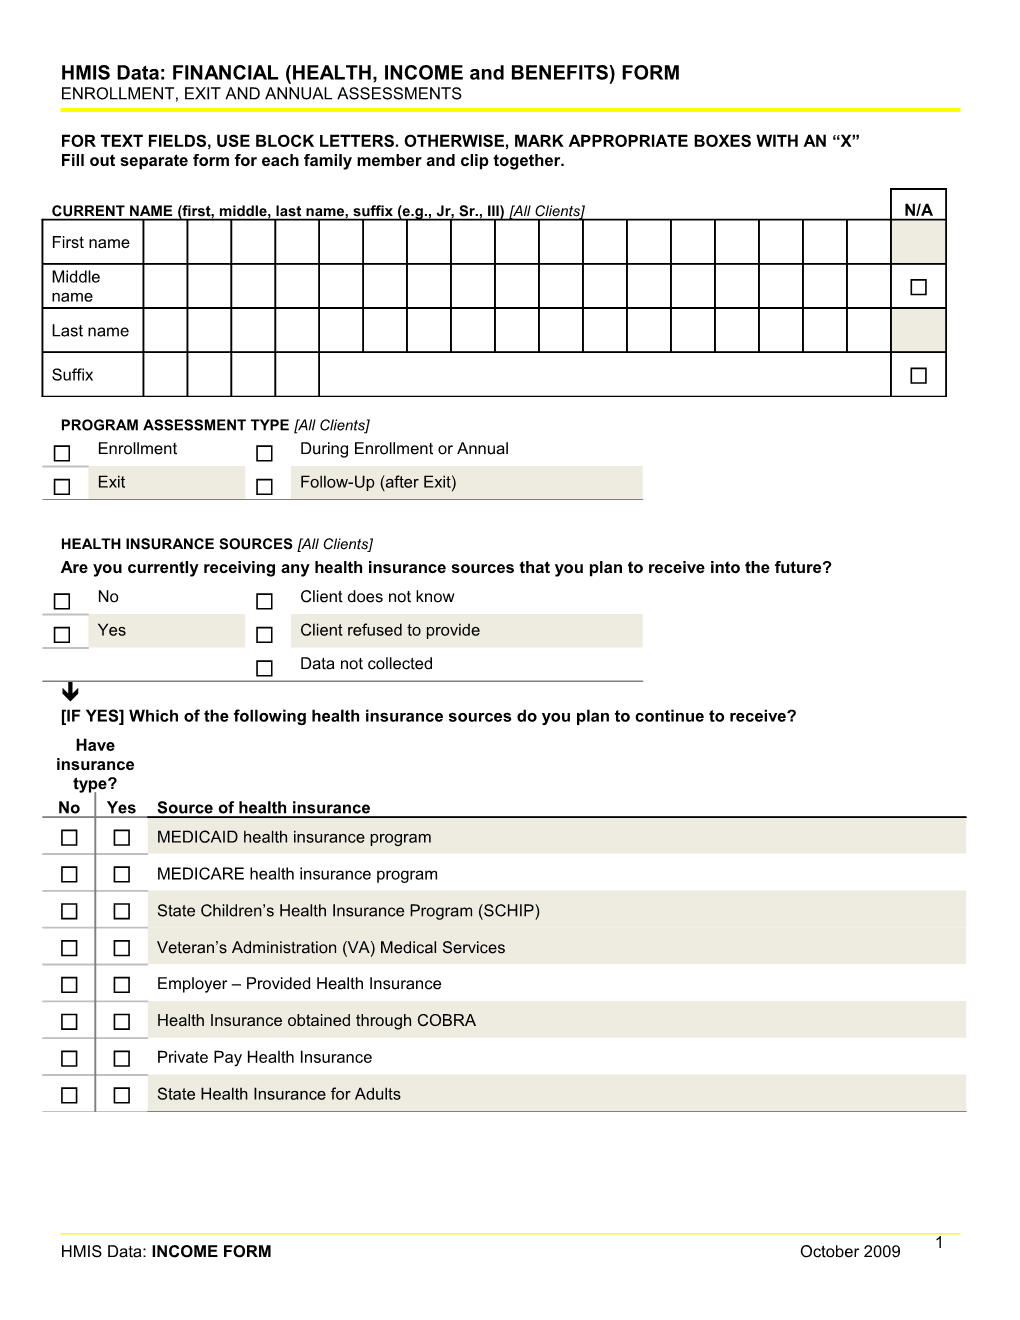 HPRP HMIS Data Collection: INCOME ASSESSMENT FORM